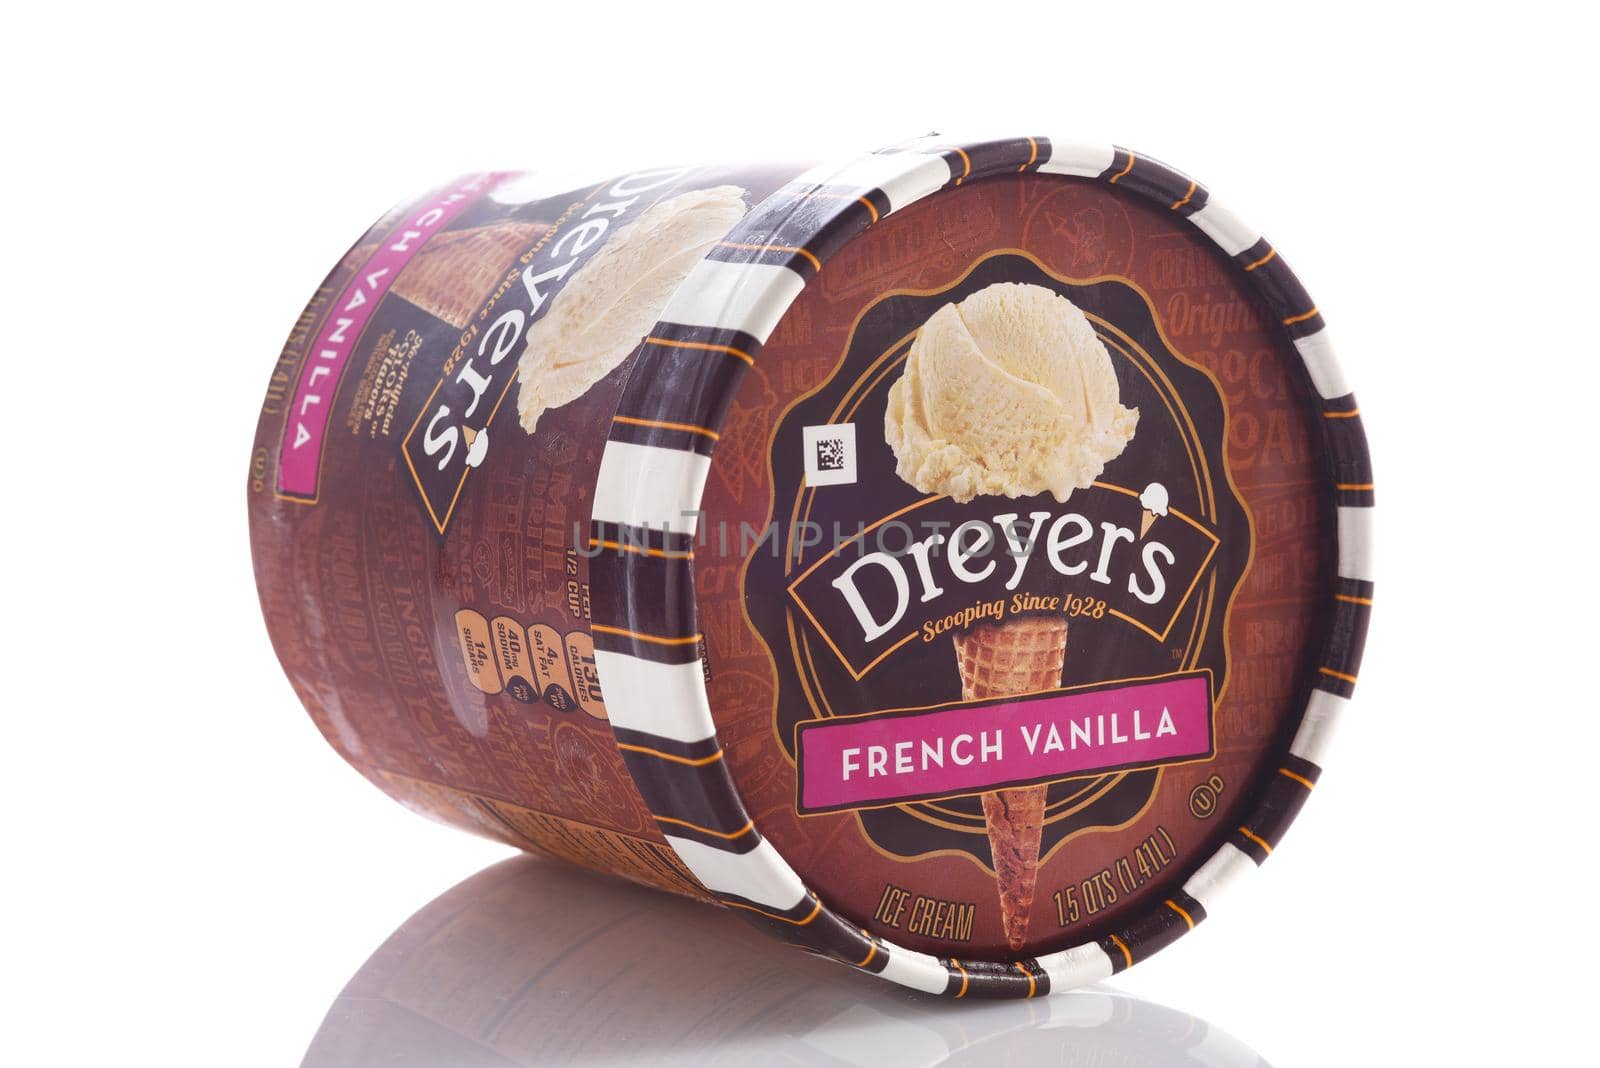 IRVINE, CALIFORNIA - MAY 6, 2019: A Carton of Dreyers Grand Ice Cream French Vanilla. A subsidiary of Nestles, Dreyers is marketed in the western USA and as Edys in the East and Midwest.